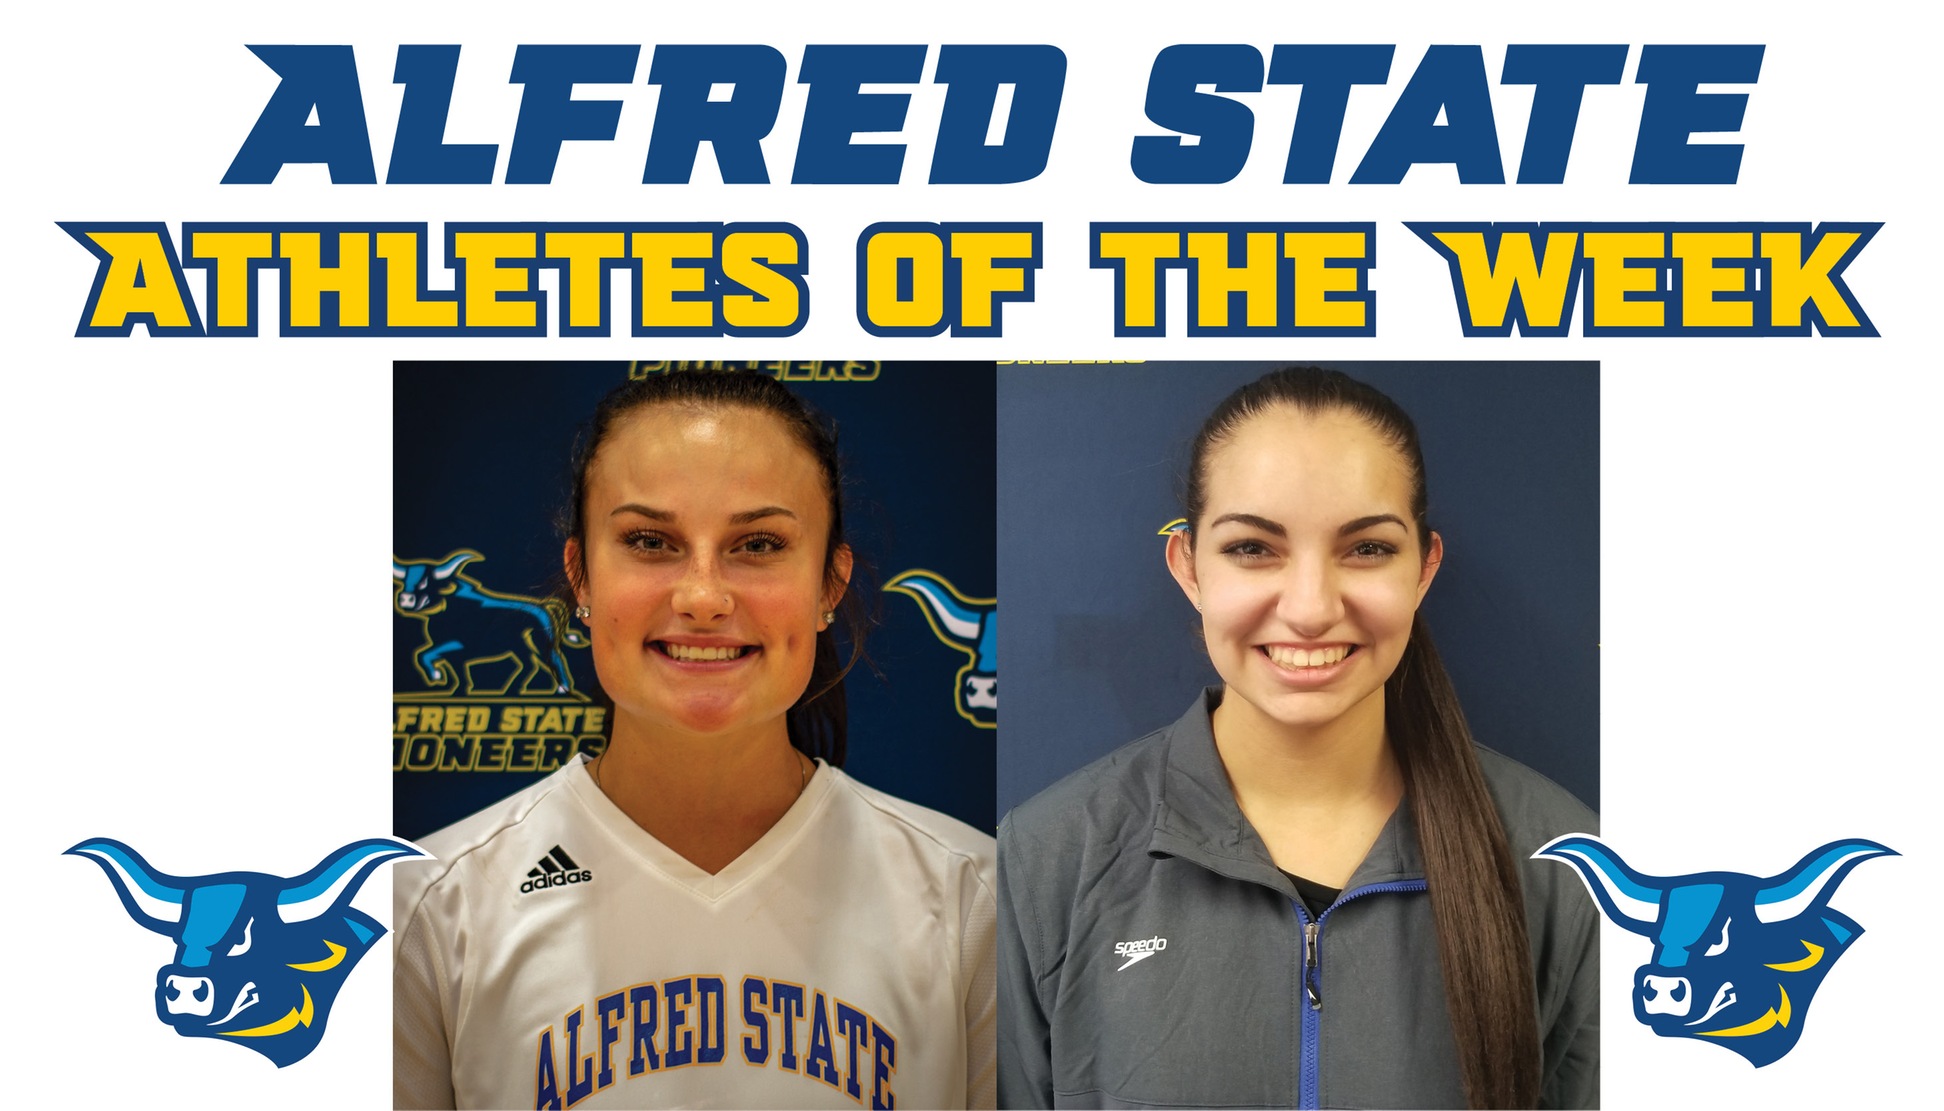 Maggie Meyer and Jessie LaRue named Athletes of the Week